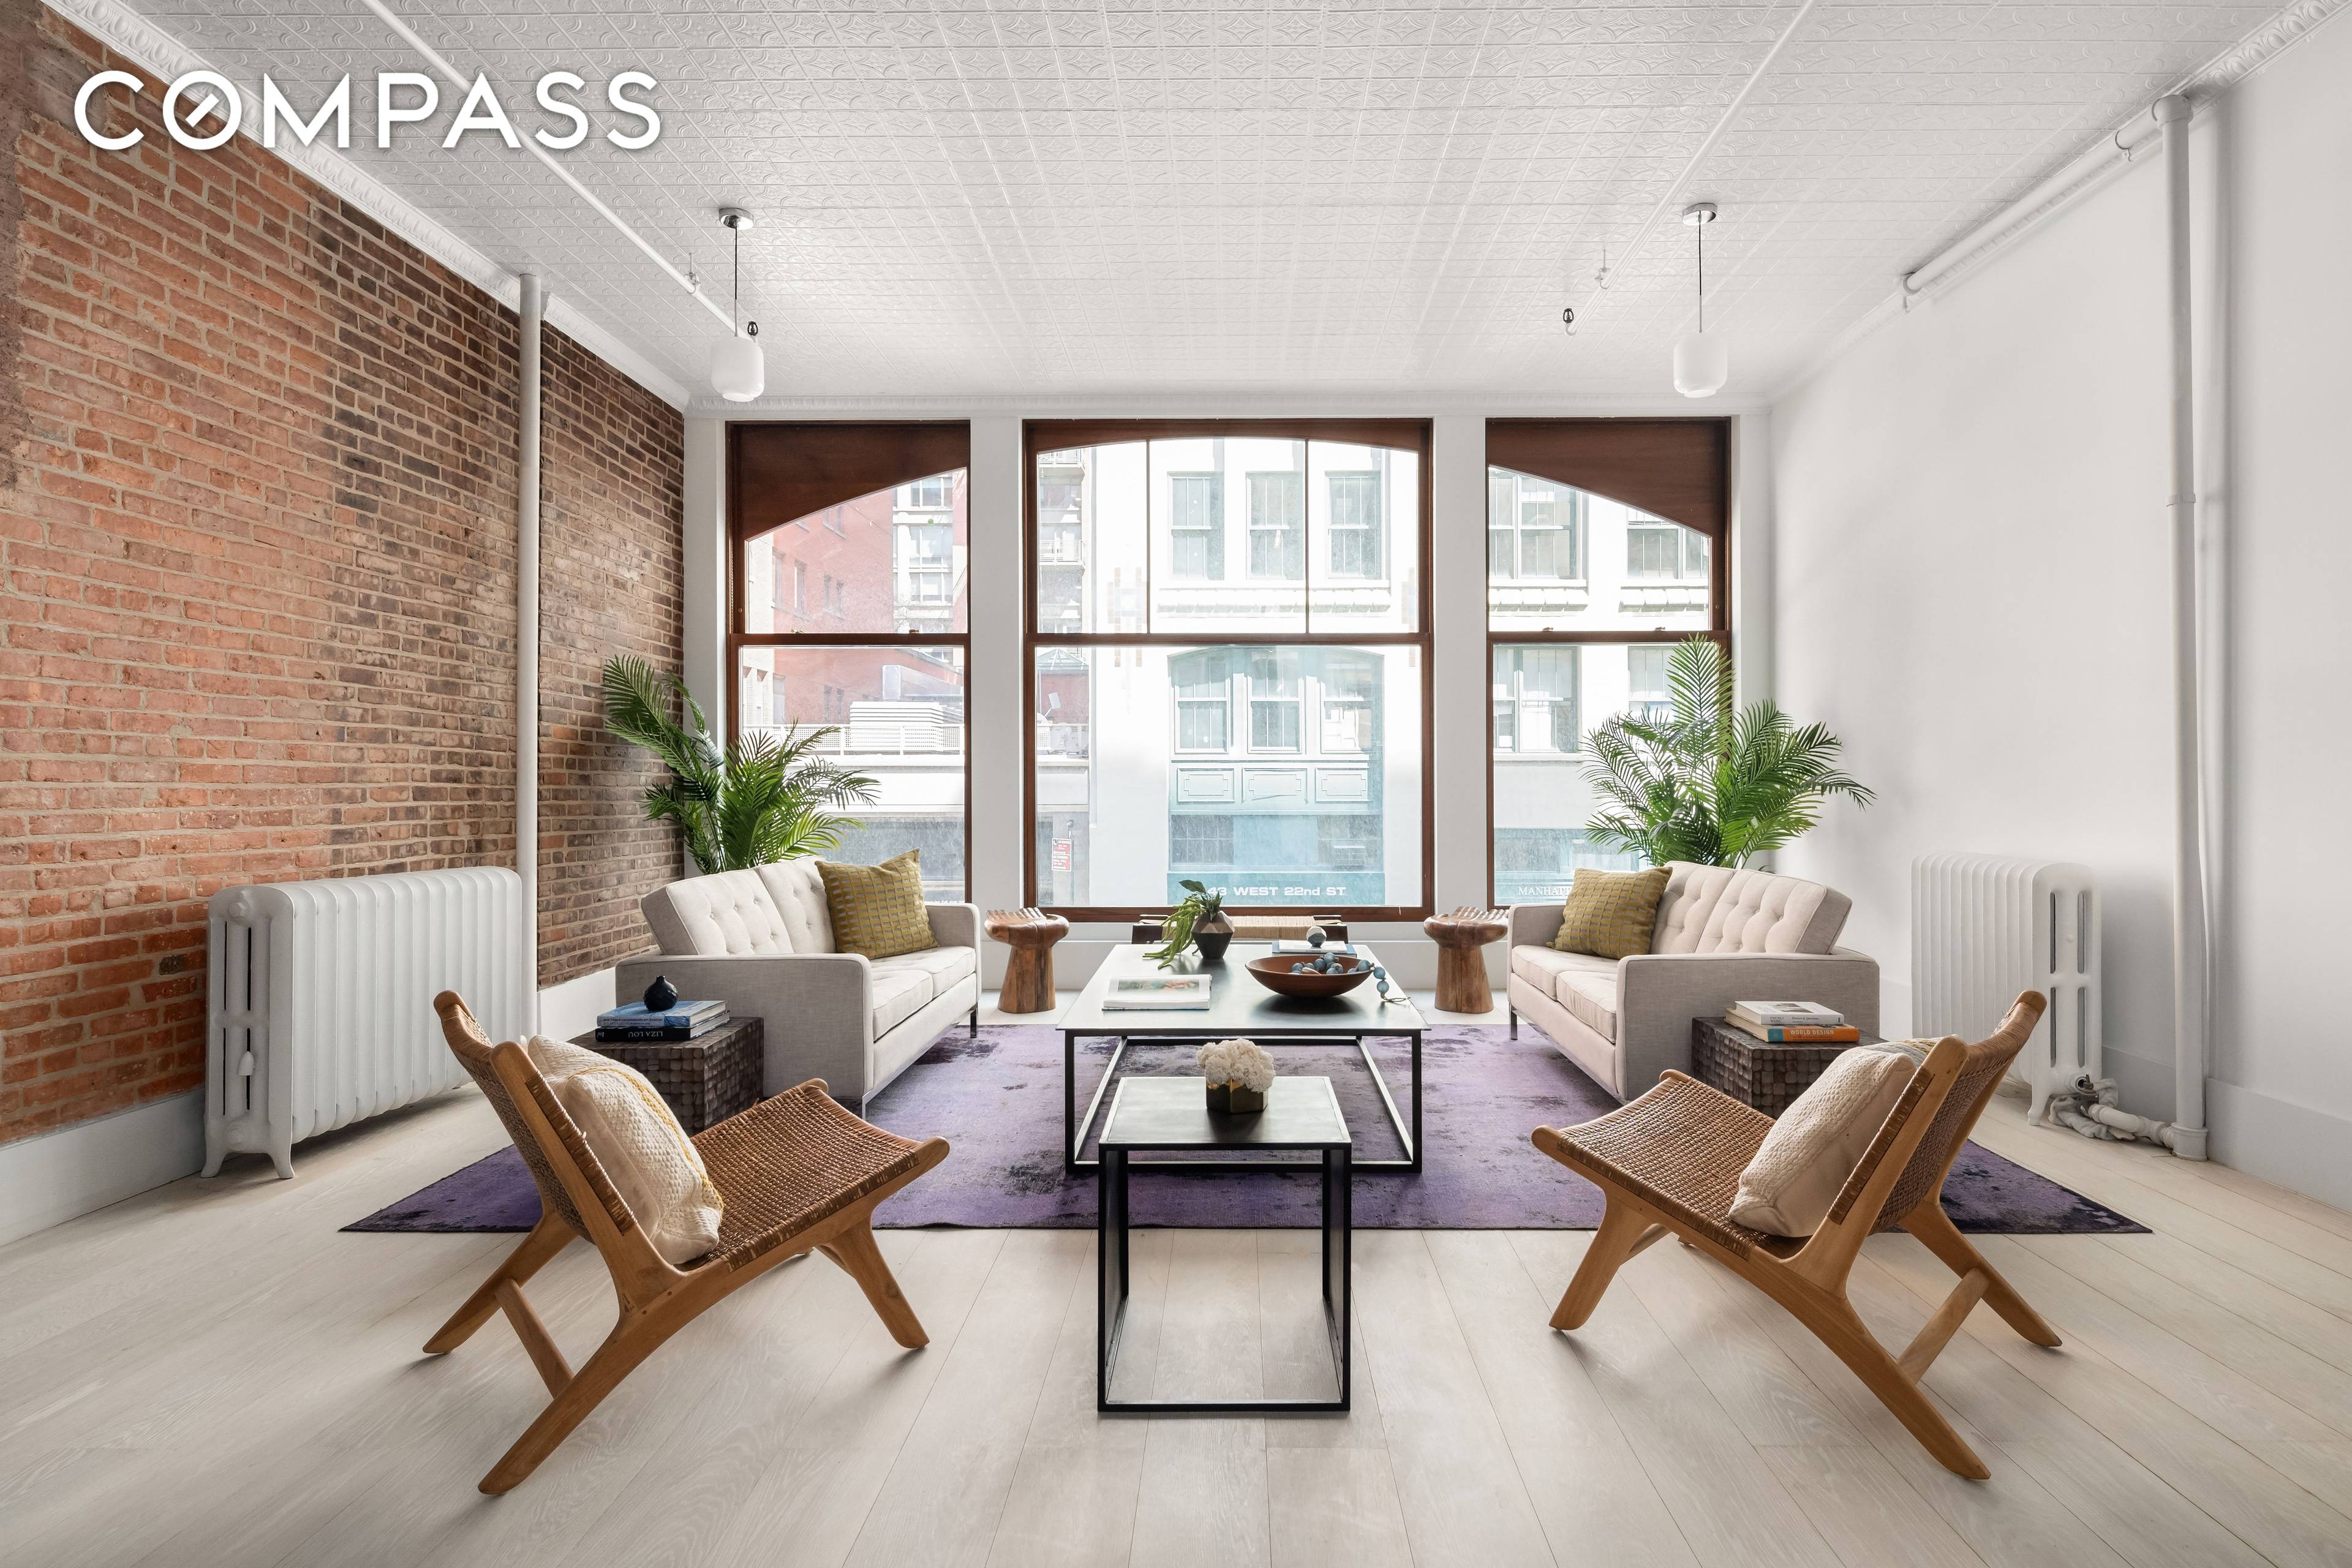 Welcome to this completely and newly renovated full floor 2 bedroom, 2 bathroom loft in a landmarked boutique Cooperative in the Flatiron district.